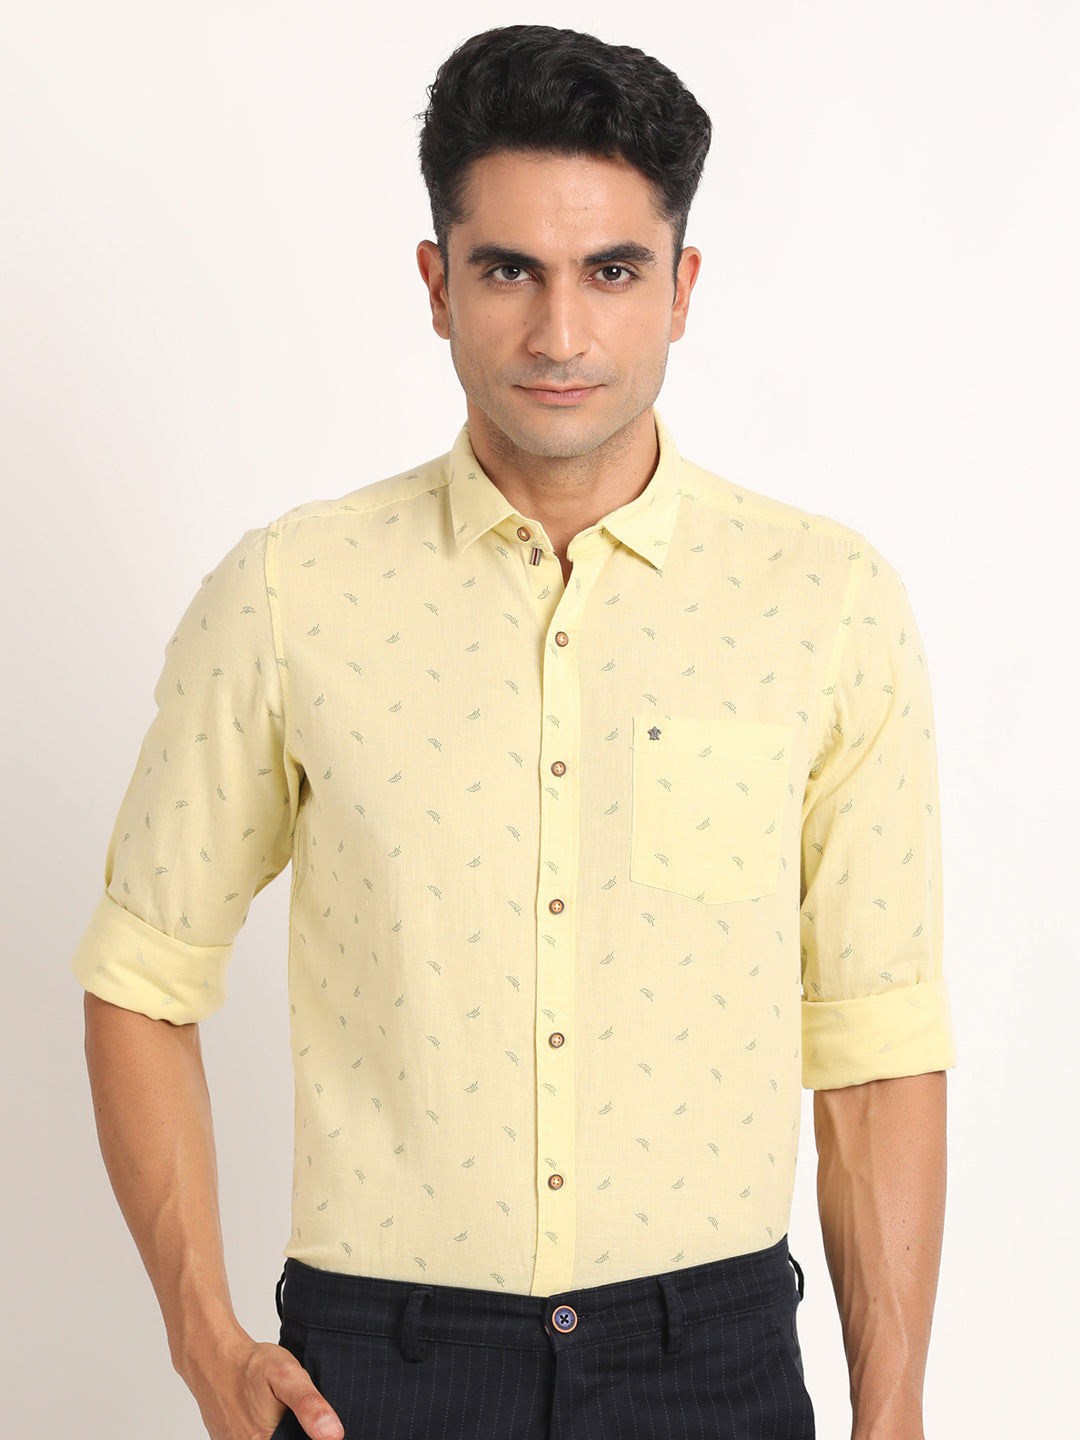 Cotton Linen Light Yellow Printed Slim Fit Full Sleeve Casual Shirt